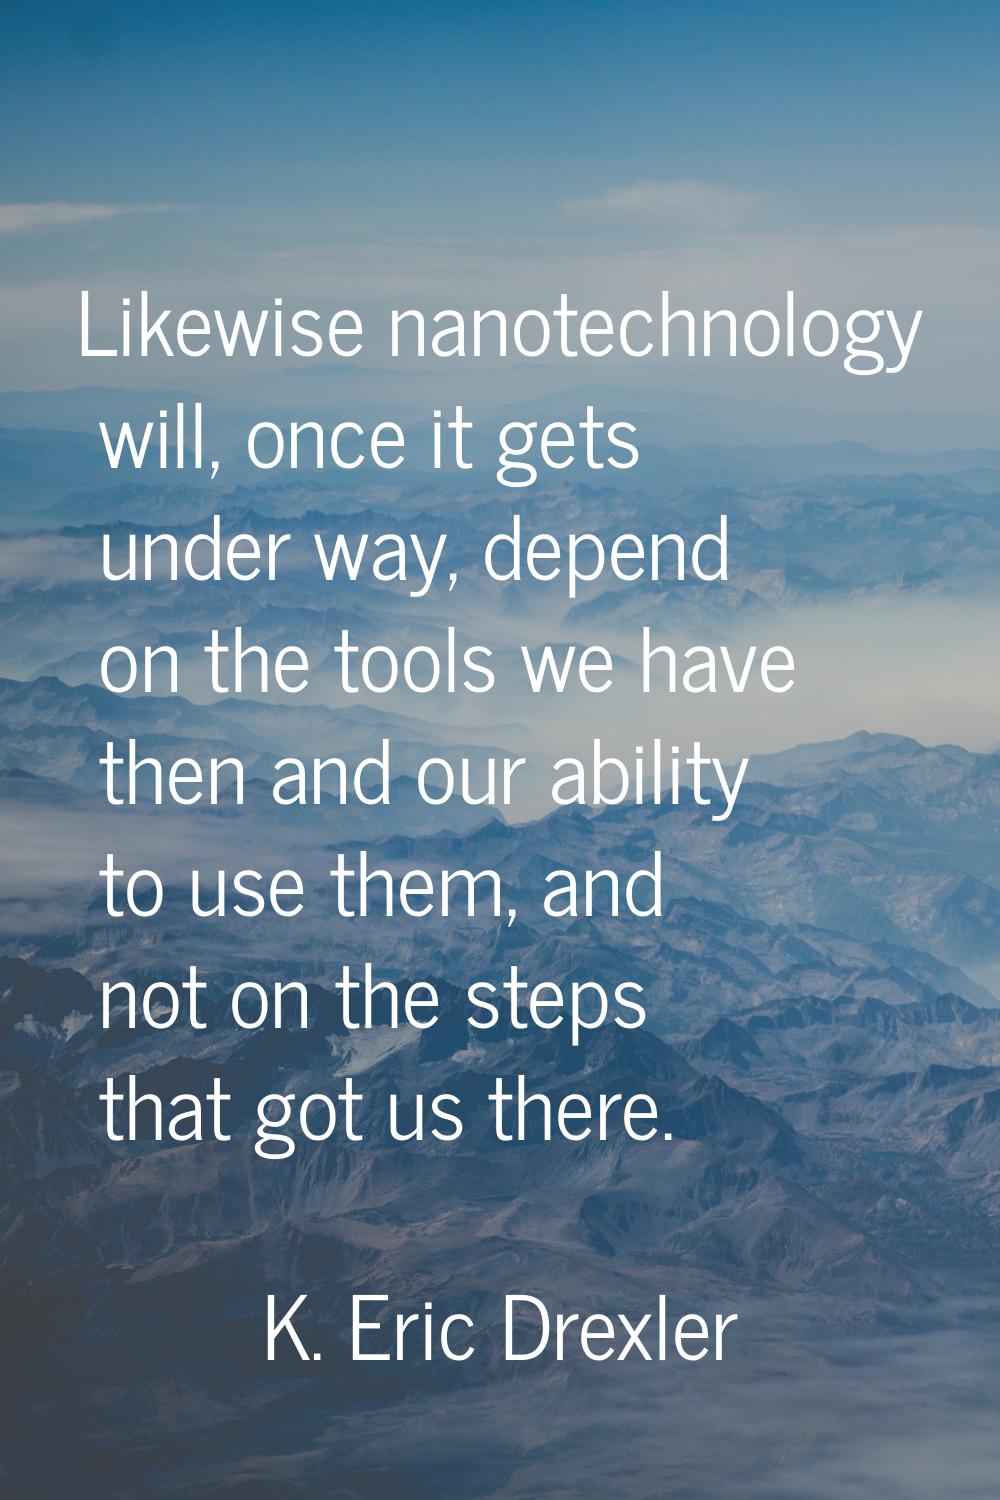 Likewise nanotechnology will, once it gets under way, depend on the tools we have then and our abil